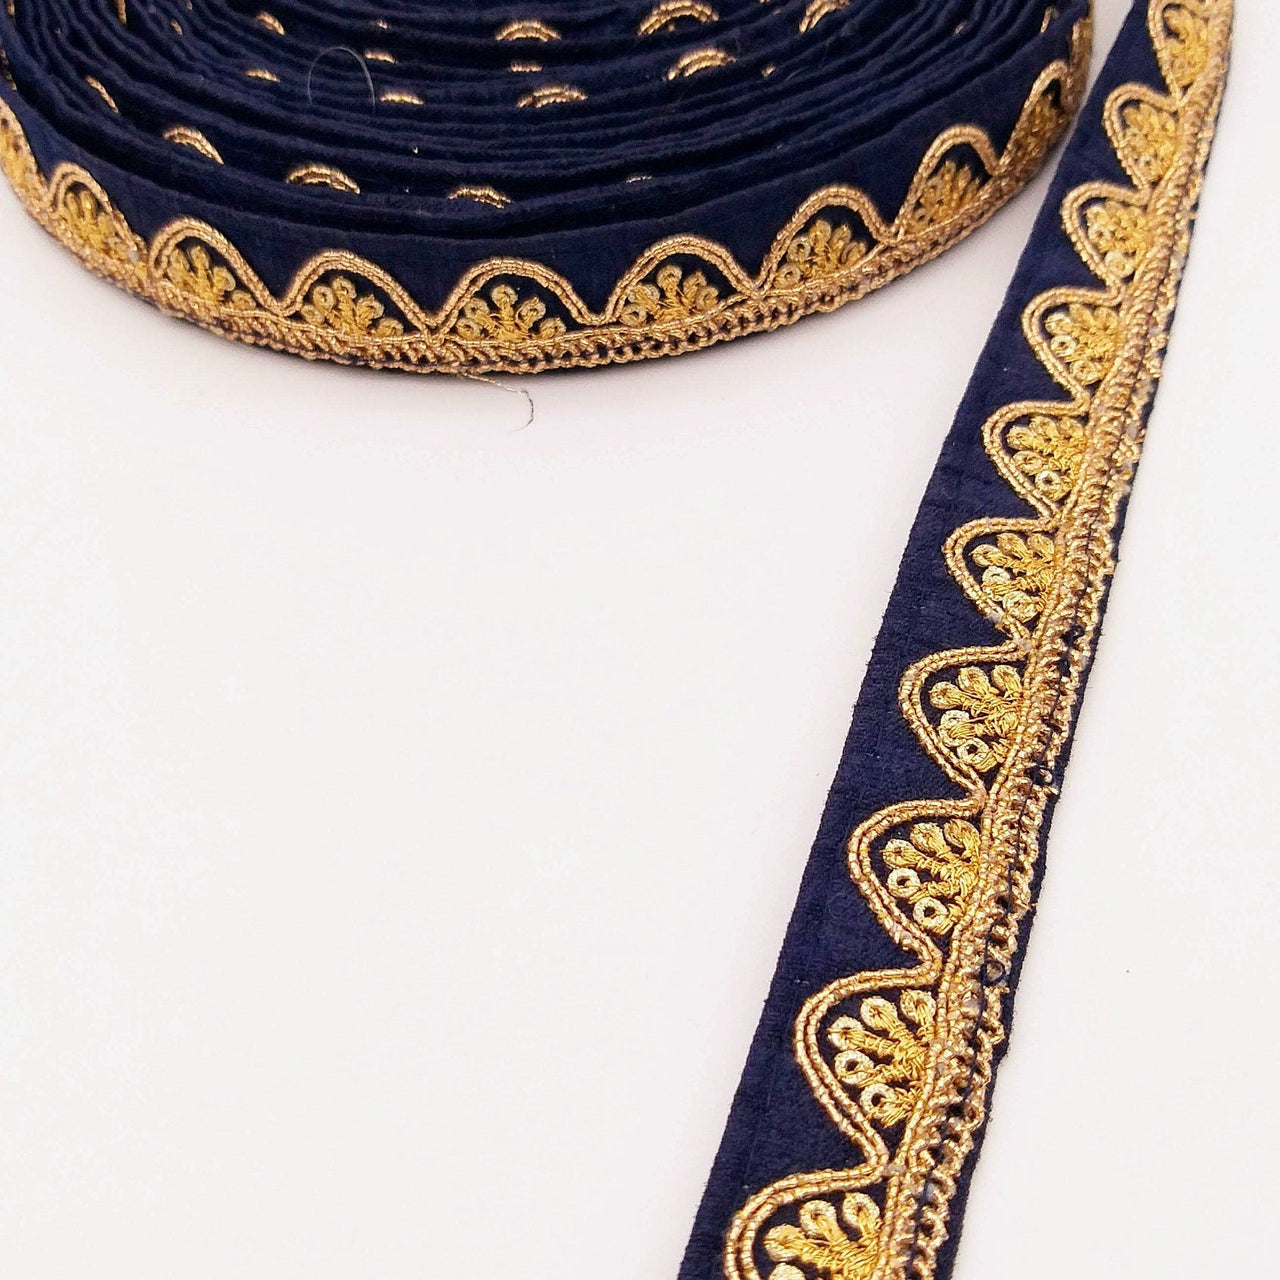 Navy Blue Art Silk Trim with Gold Embroidery and Sequins Indian Sari Border Trim By 3 Yards Decorative Trim Craft Lace